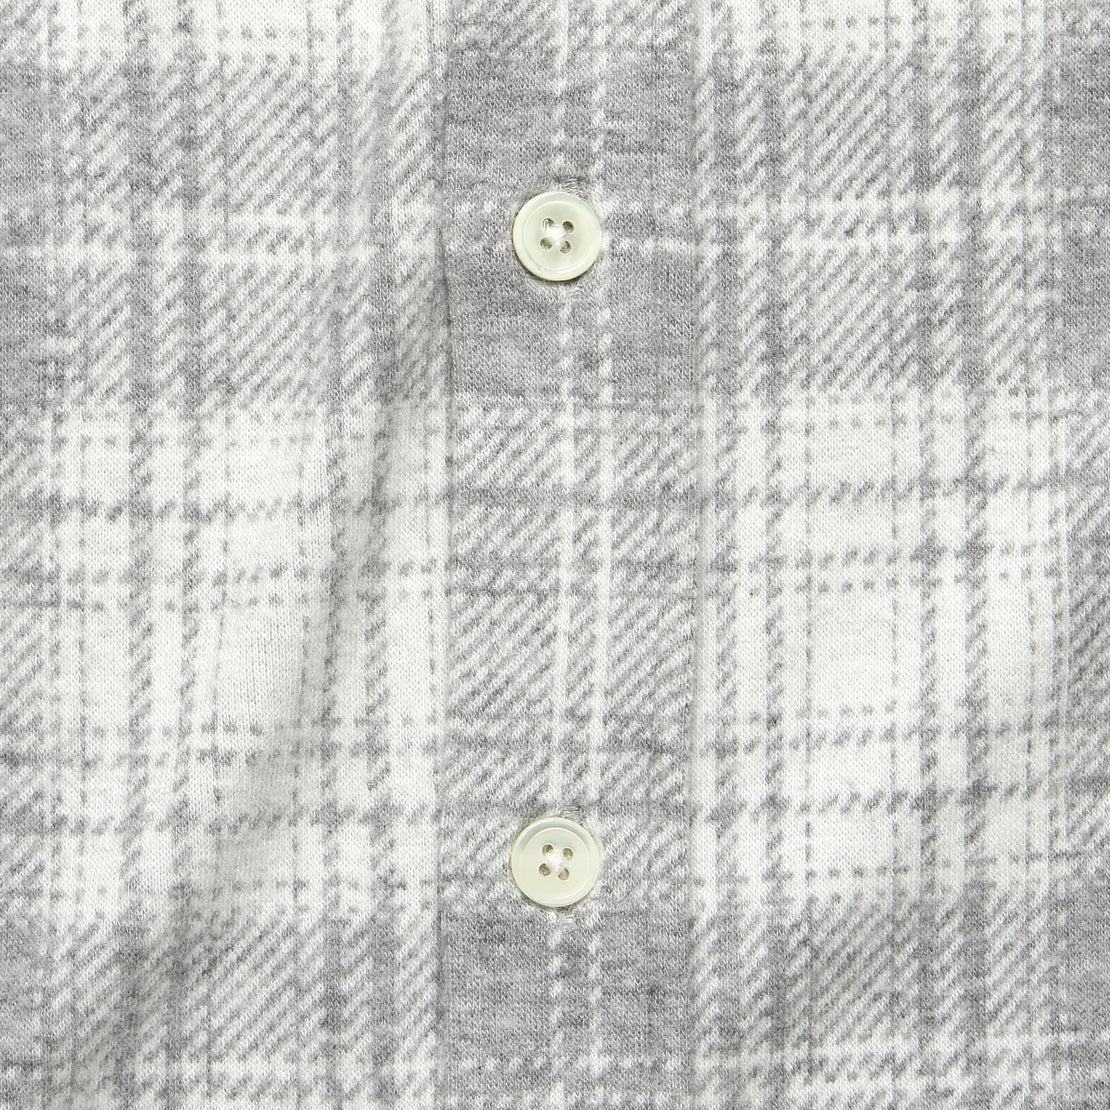 Legend Sweater Shirt - Winter Clouds Plaid - Faherty - STAG Provisions - Tops - L/S Woven - Plaid